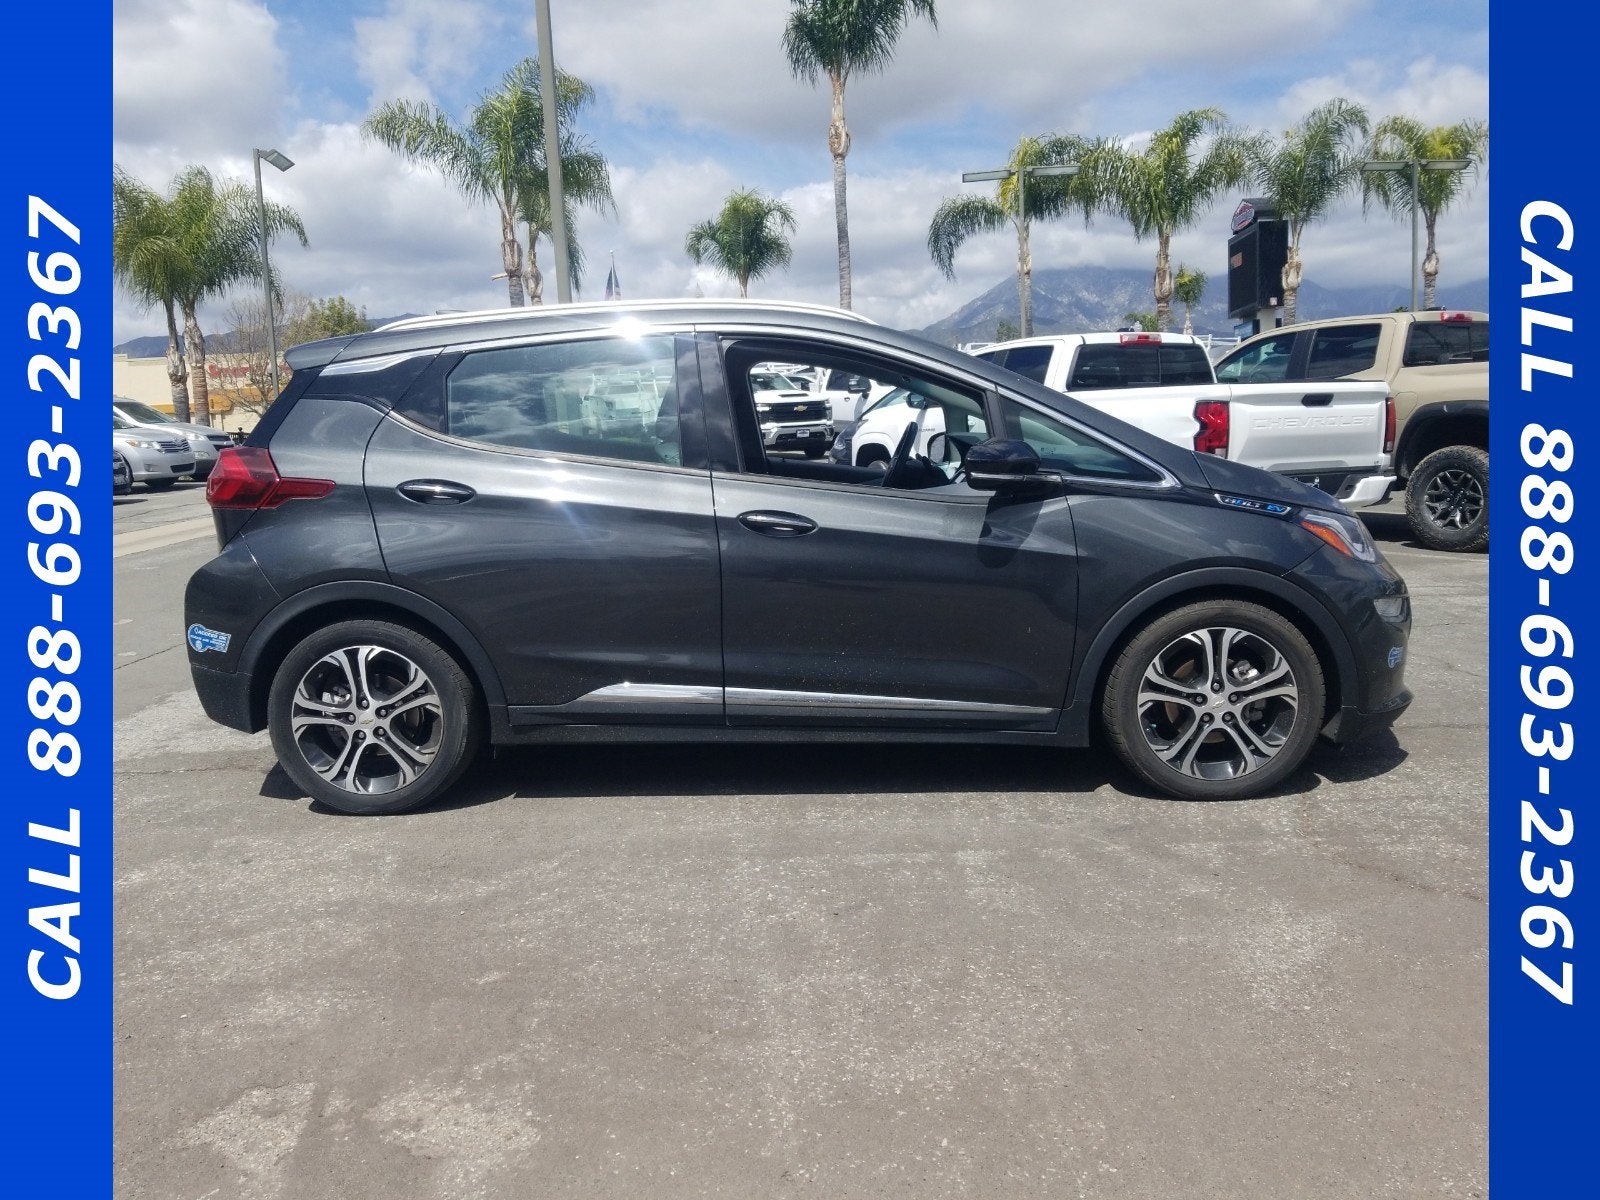 Used 2021 Chevrolet Bolt EV Premier with VIN 1G1FZ6S03M4108099 for sale in Upland, CA